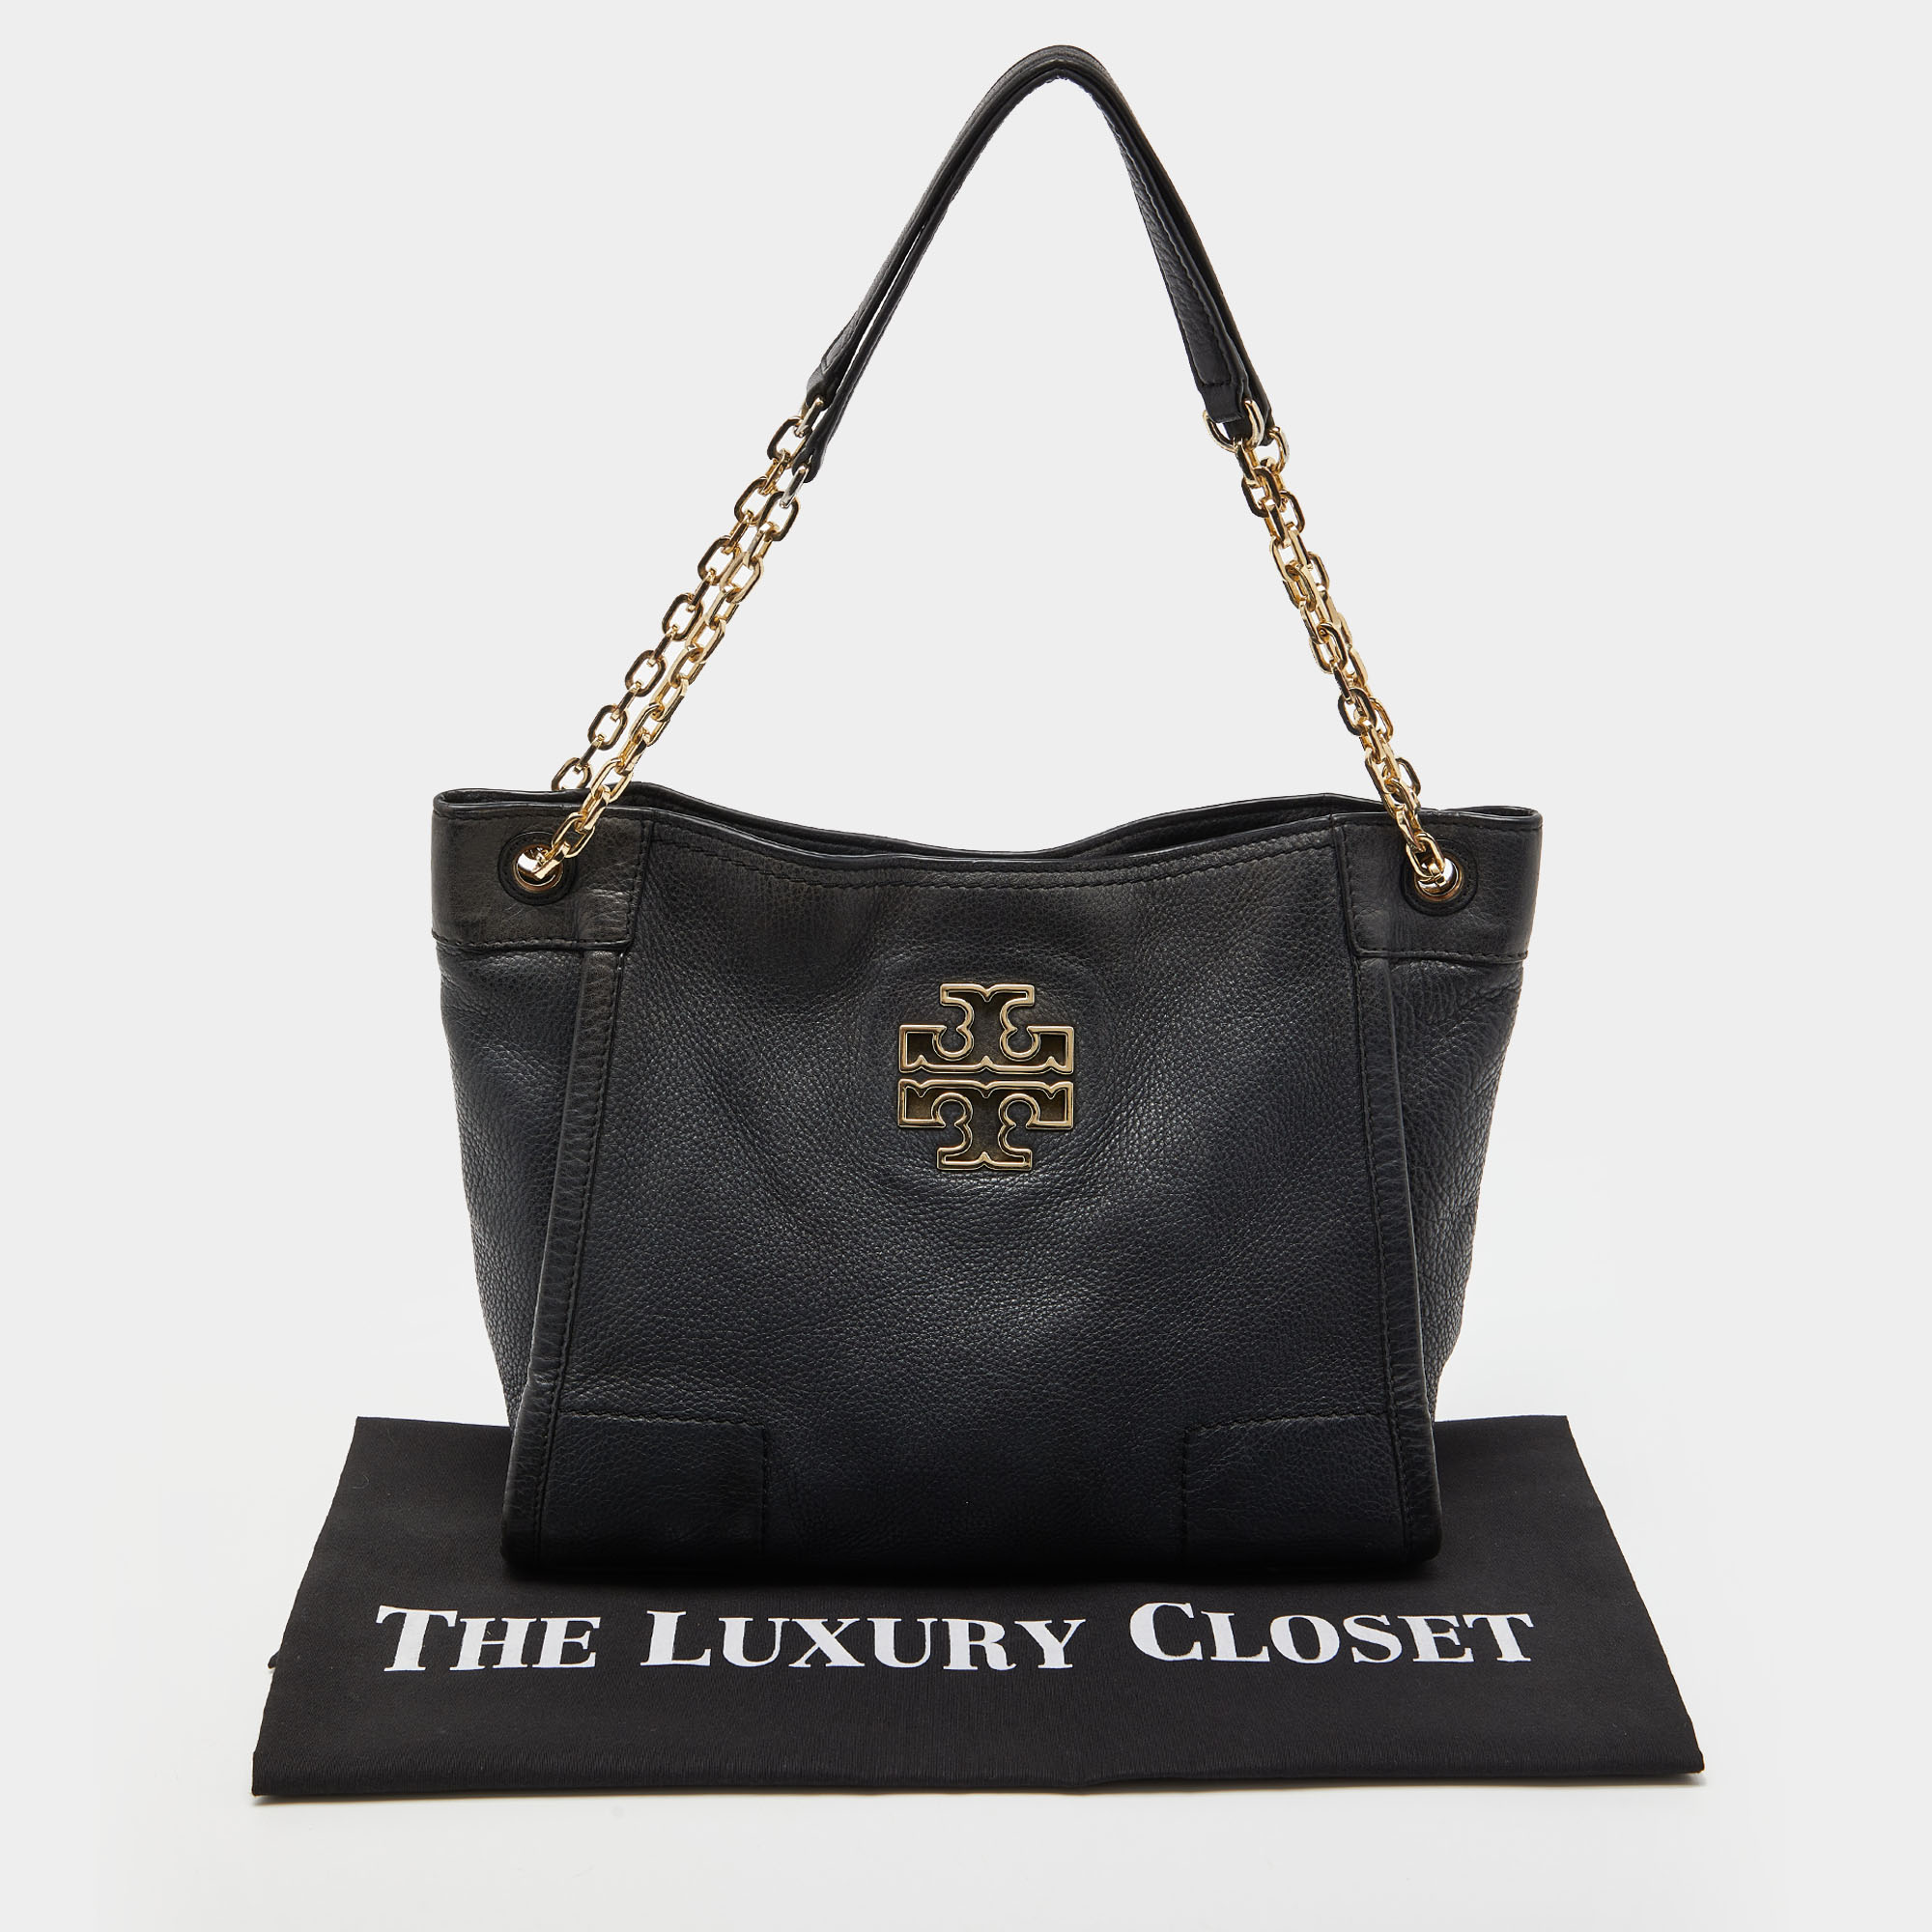 Tory Burch Black Leather McGraw Slouchy Tote